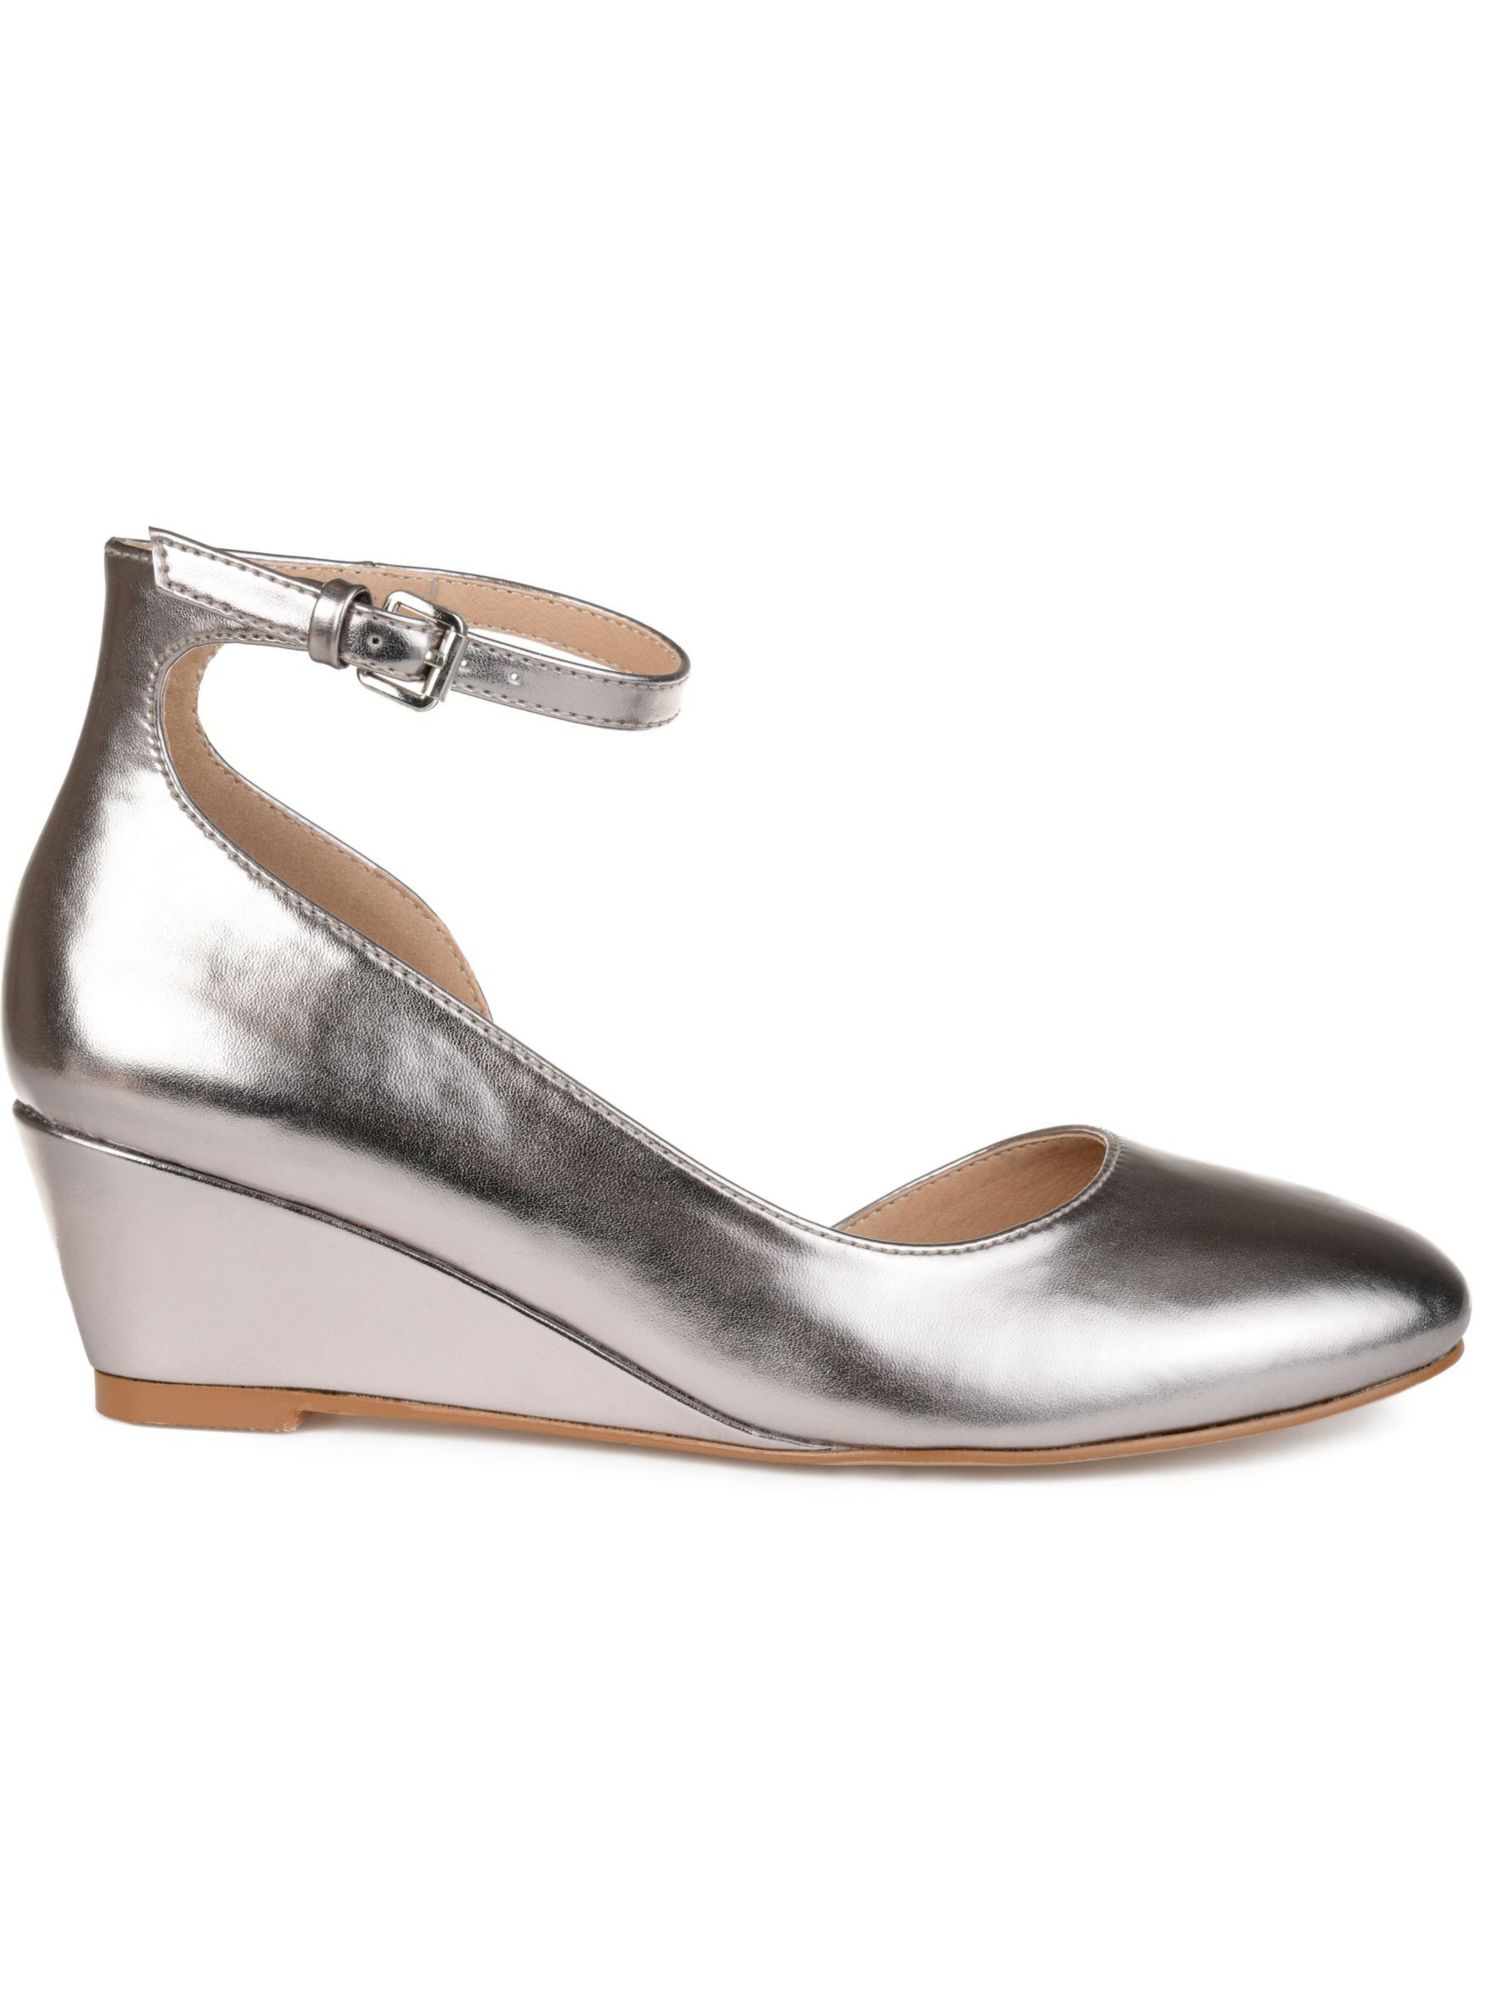 JOURNEE COLLECTION Womens Silver D Orsay Metallic Ankle Strap Seely Round Toe Wedge Buckle Heels 7 M